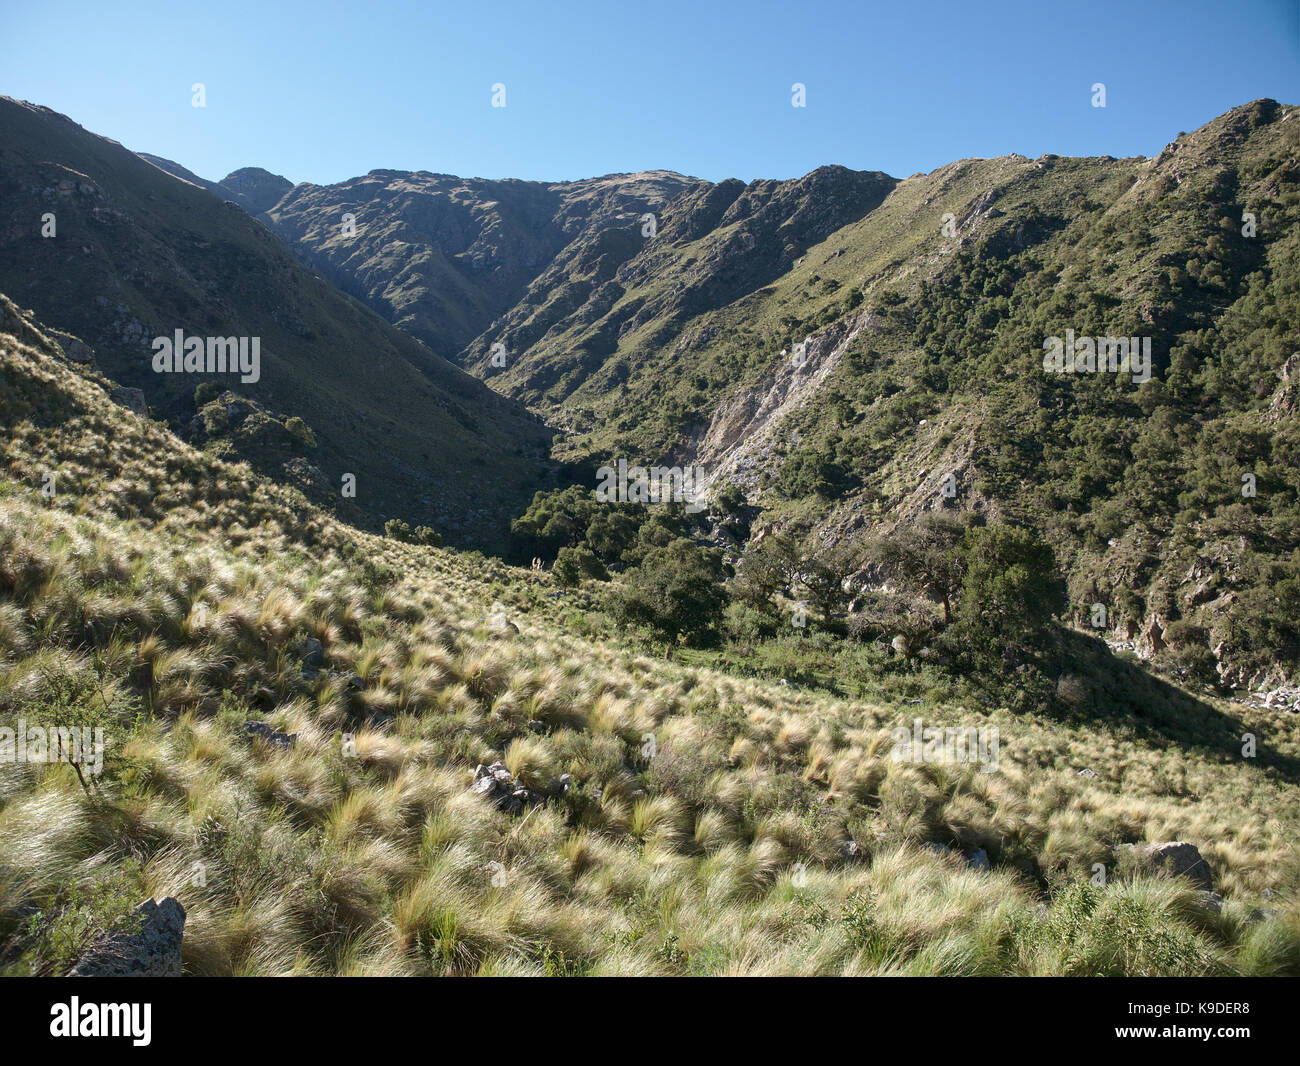 Villa de Merlo, San Luis, Argentina - 2017: The Pasos Malos creek and mountains, located at the town limits. Stock Photo